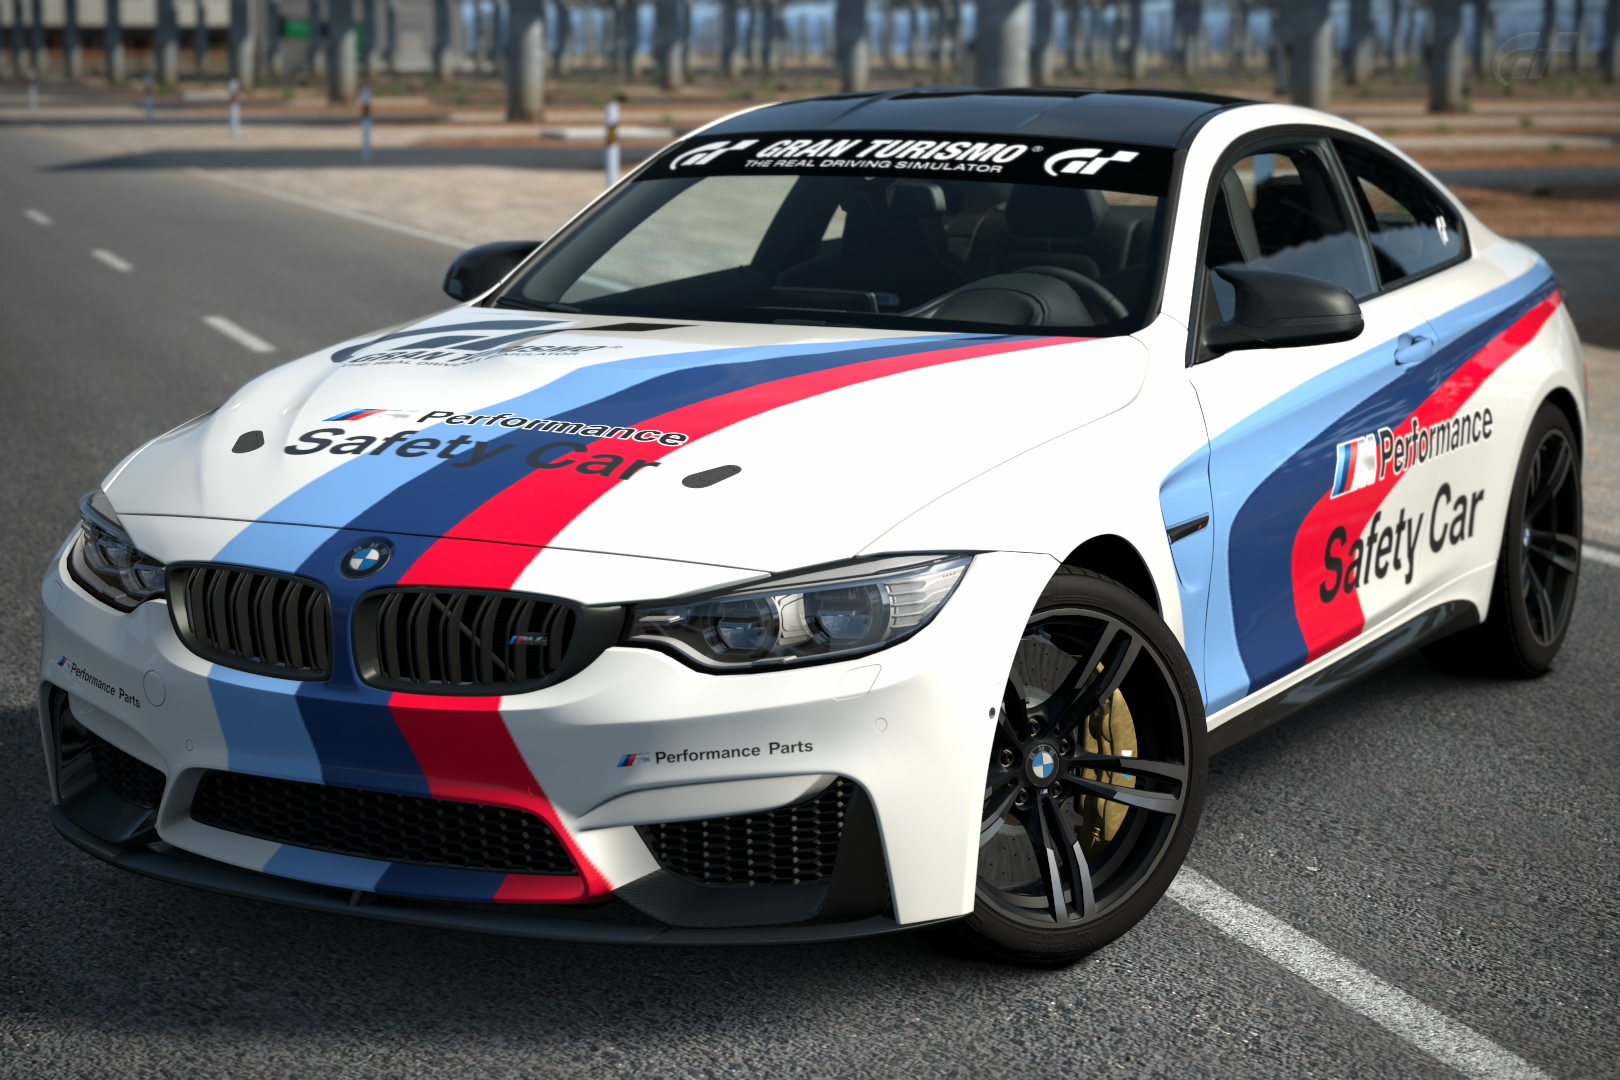 https://static.wikia.nocookie.net/gran-turismo/images/3/38/BMW_M4_M_Performance_Edition.jpg/revision/latest?cb=20190131160343